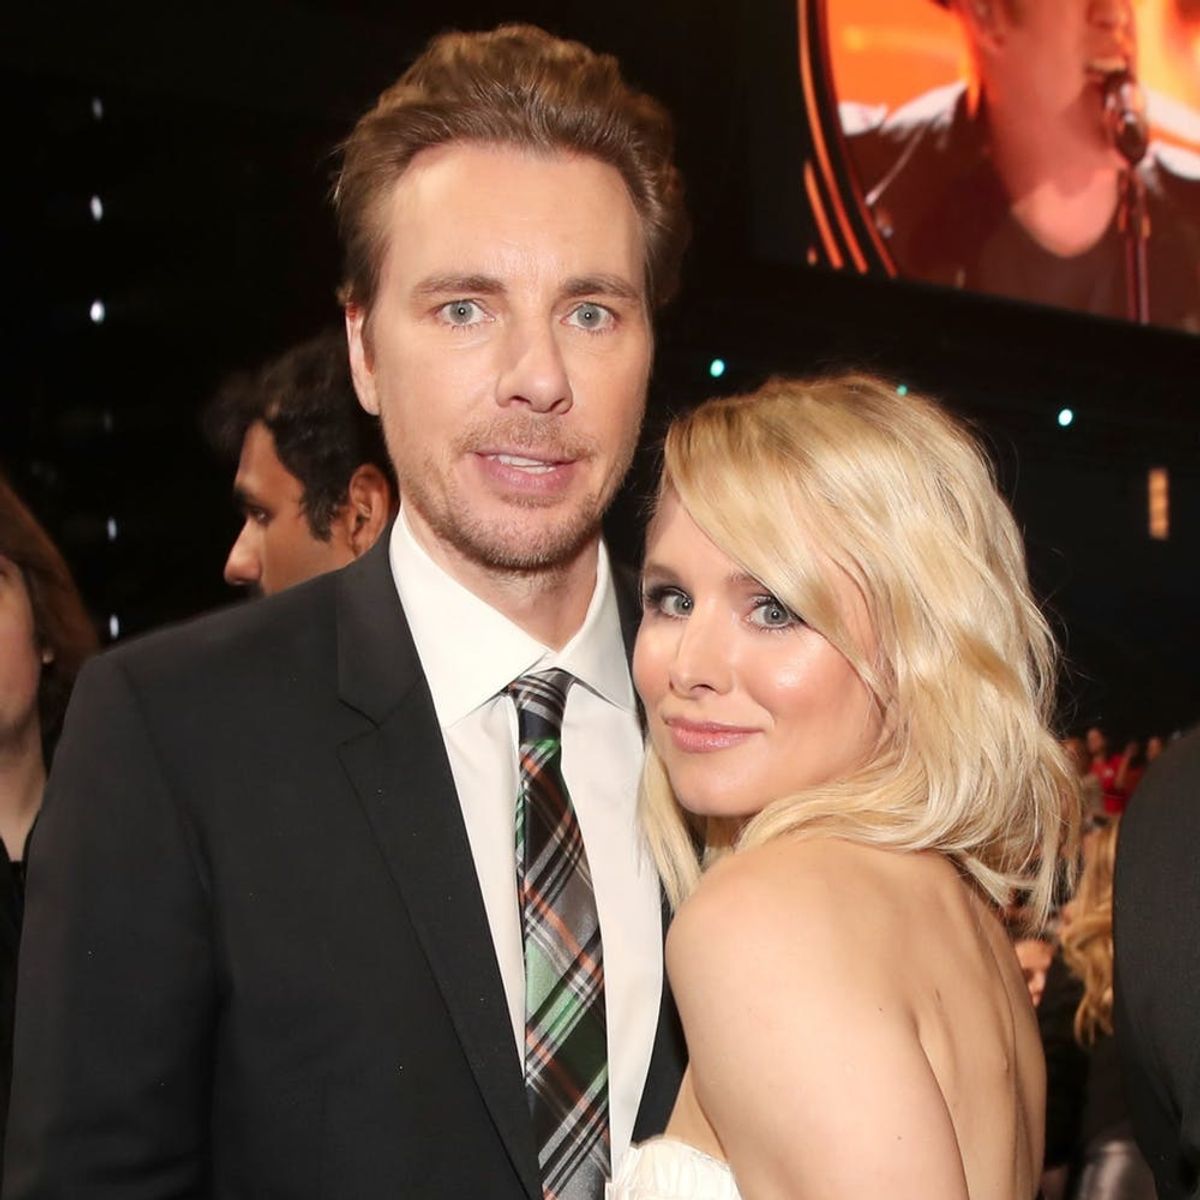 Kristen Bell and Dax Shepard Just Released a “GoT”-Themed Music Video That’s Sure to Make You Smile